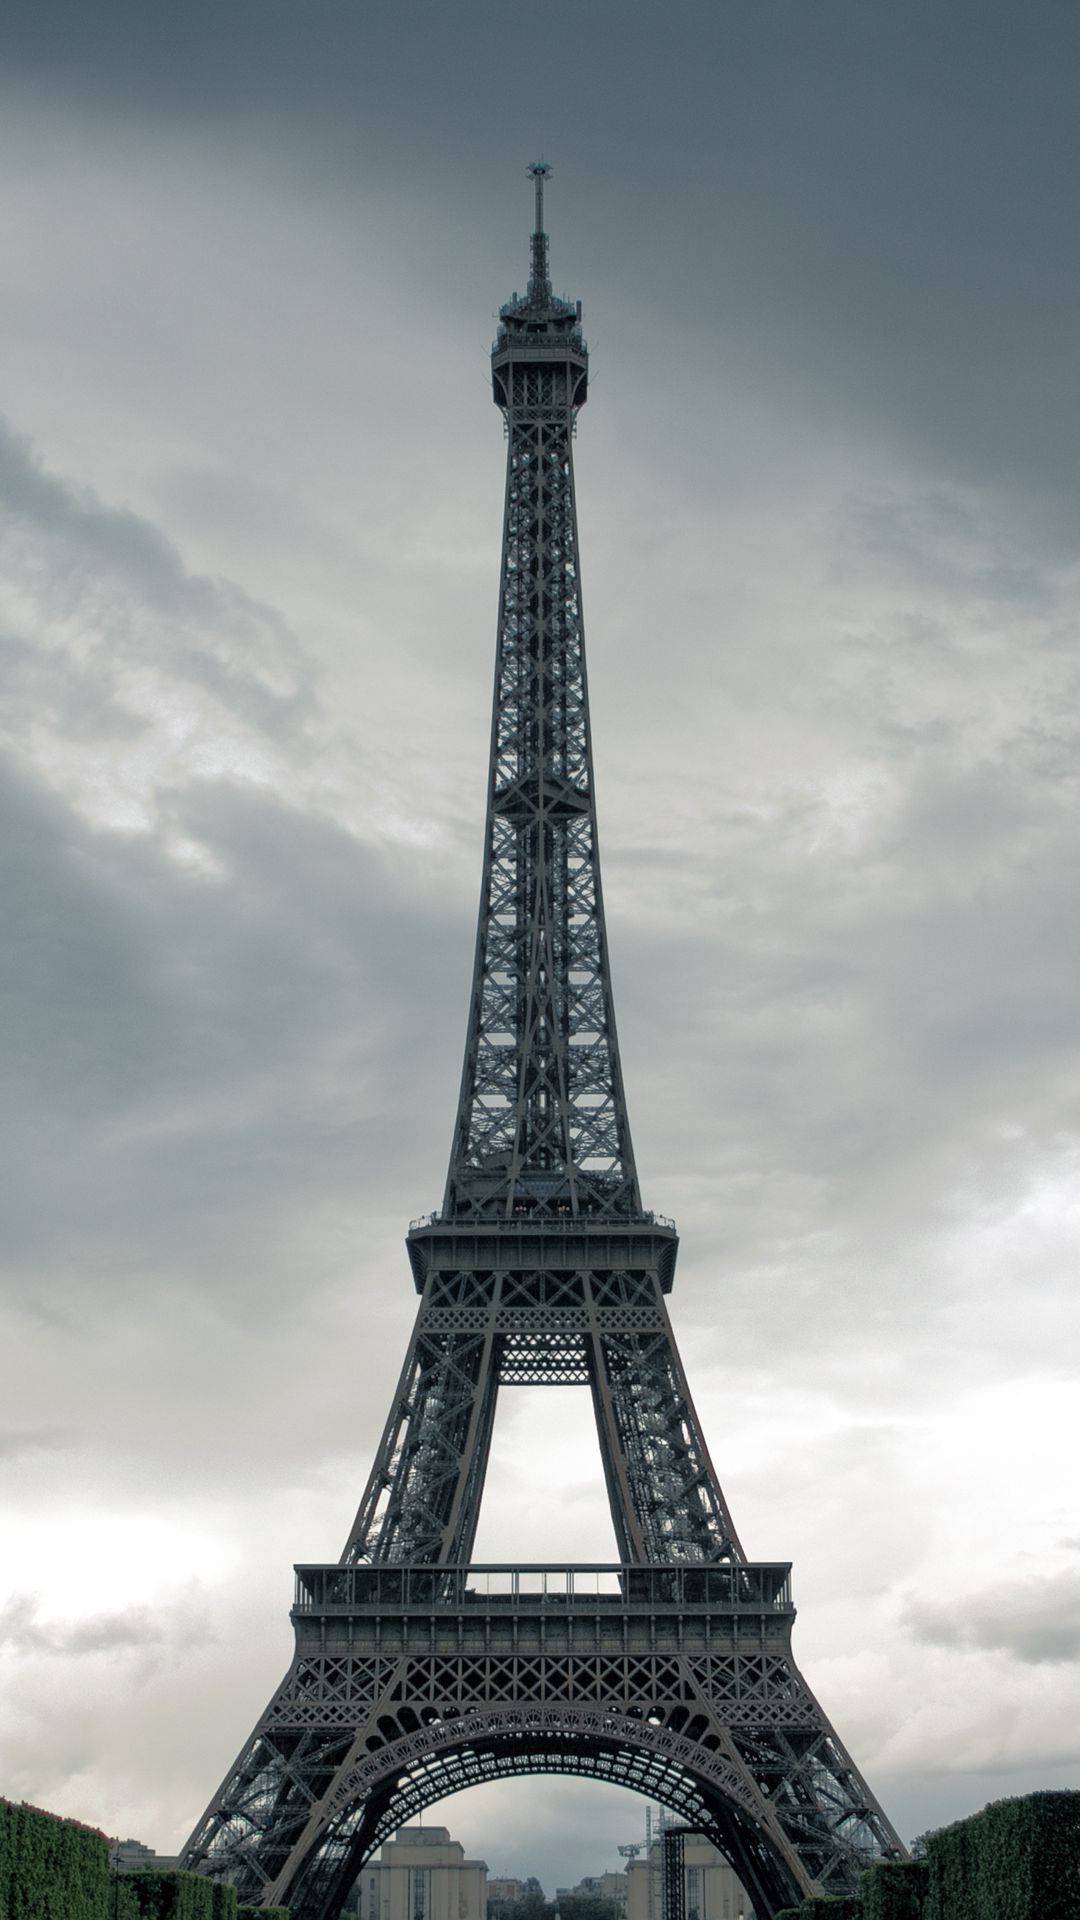 Download wallpaper 1080x1920 eiffel tower, tower, architecture, clouds ...